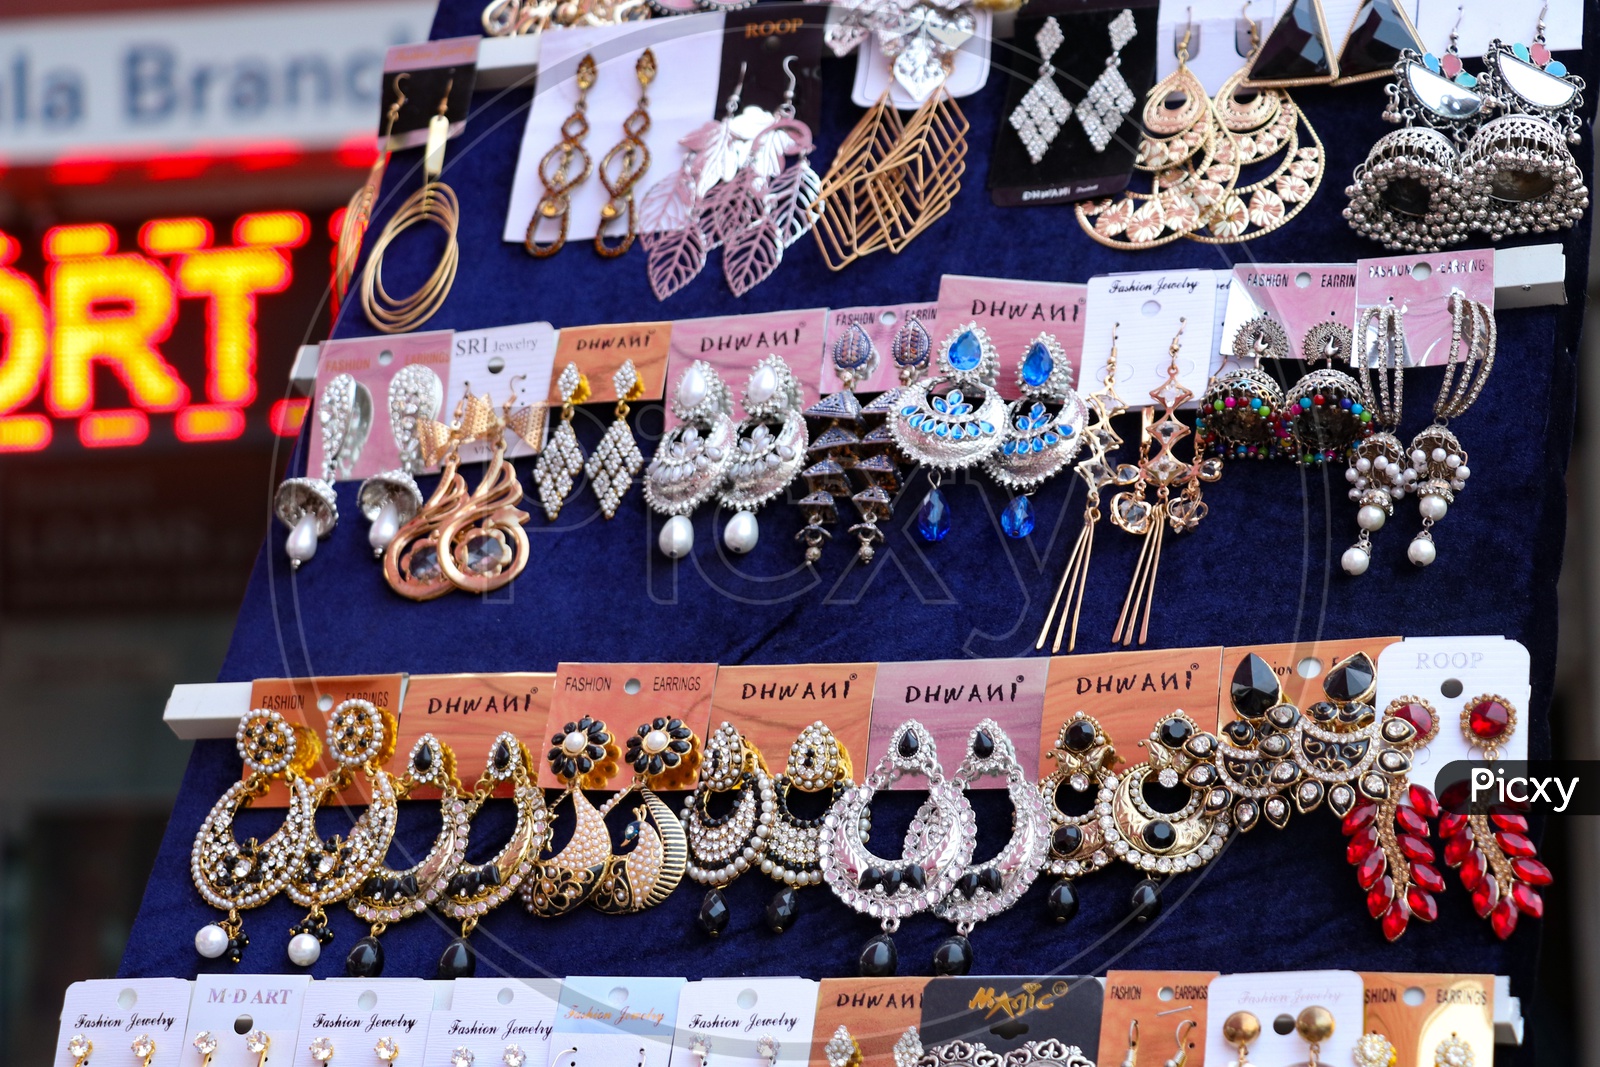 Various Designs Of Ear Tops In Display At a Stall